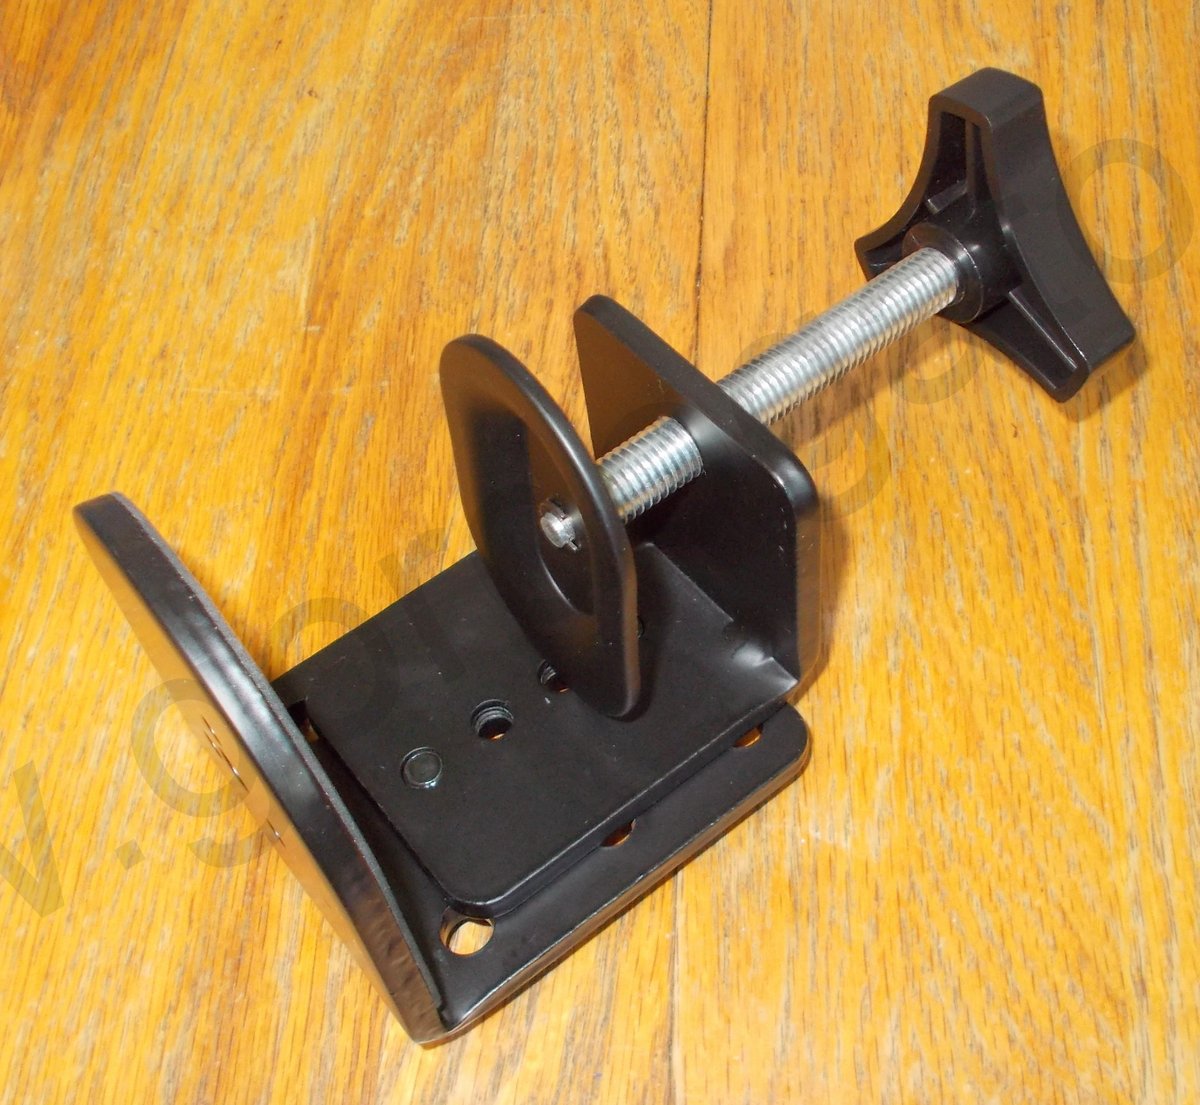 4\" C-Clamp for Use With Wali Monitor Mounts